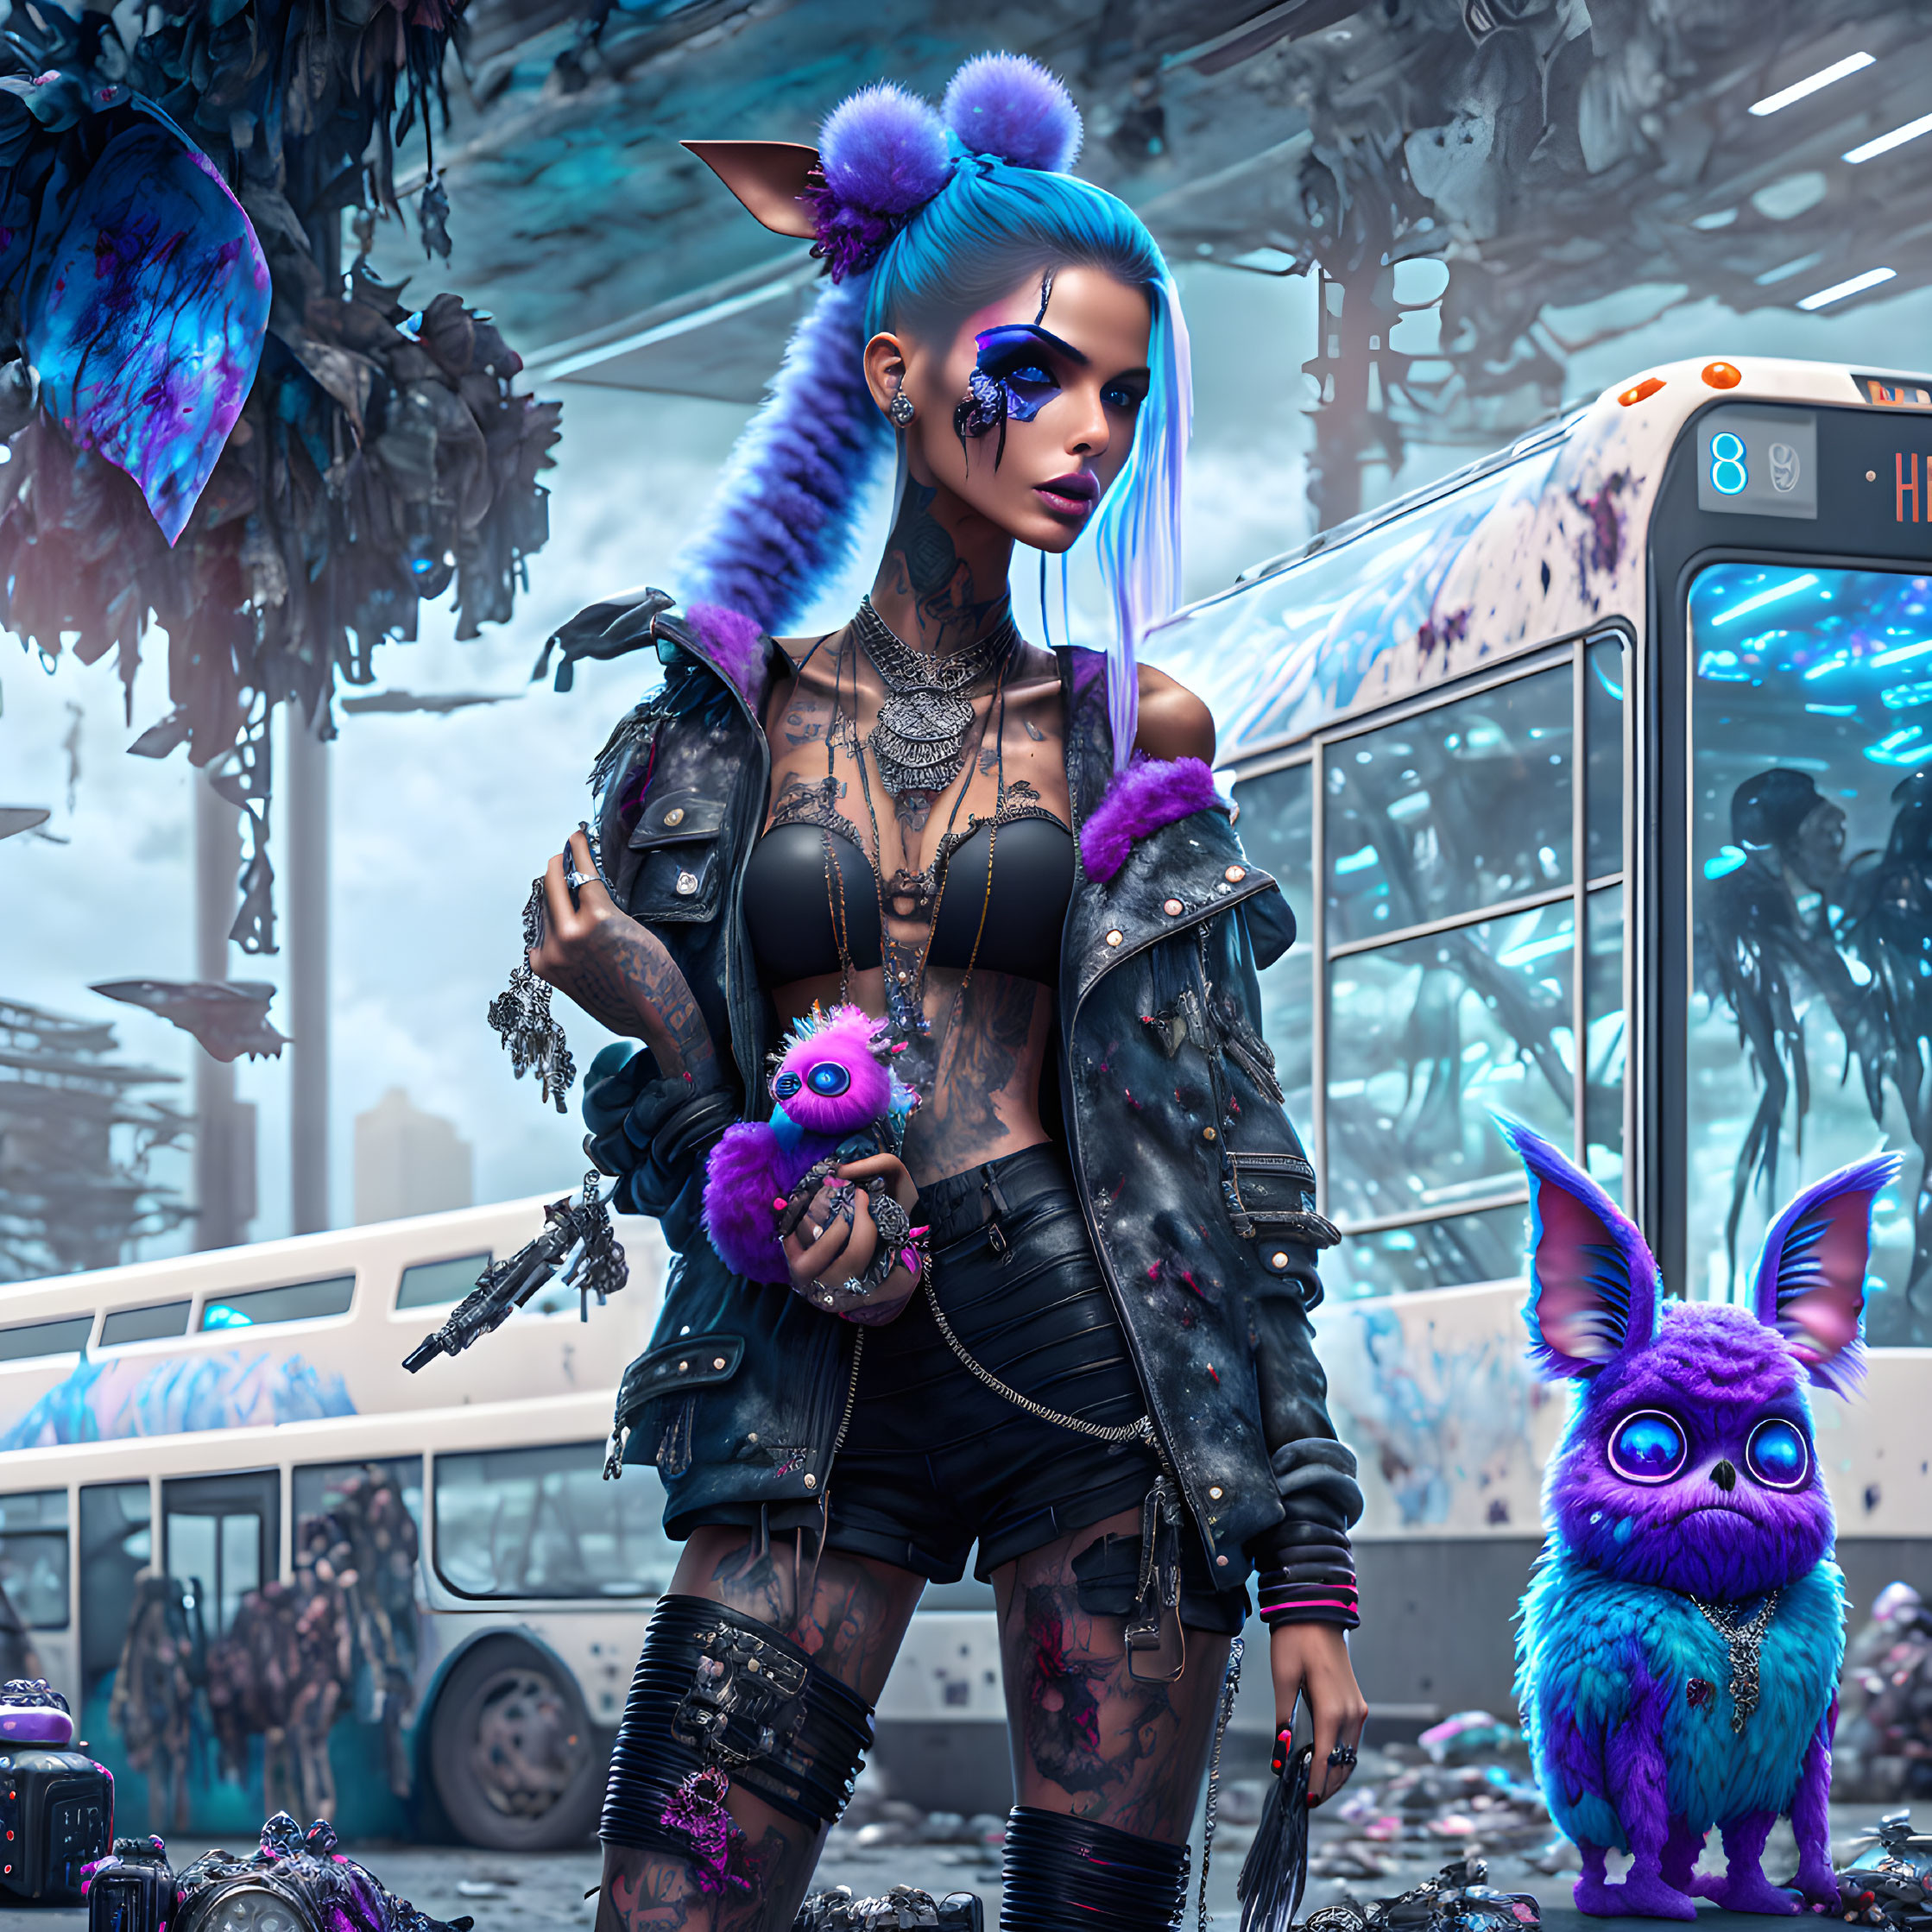 Futuristic cyberpunk woman with blue hair and tattoos in dystopian setting